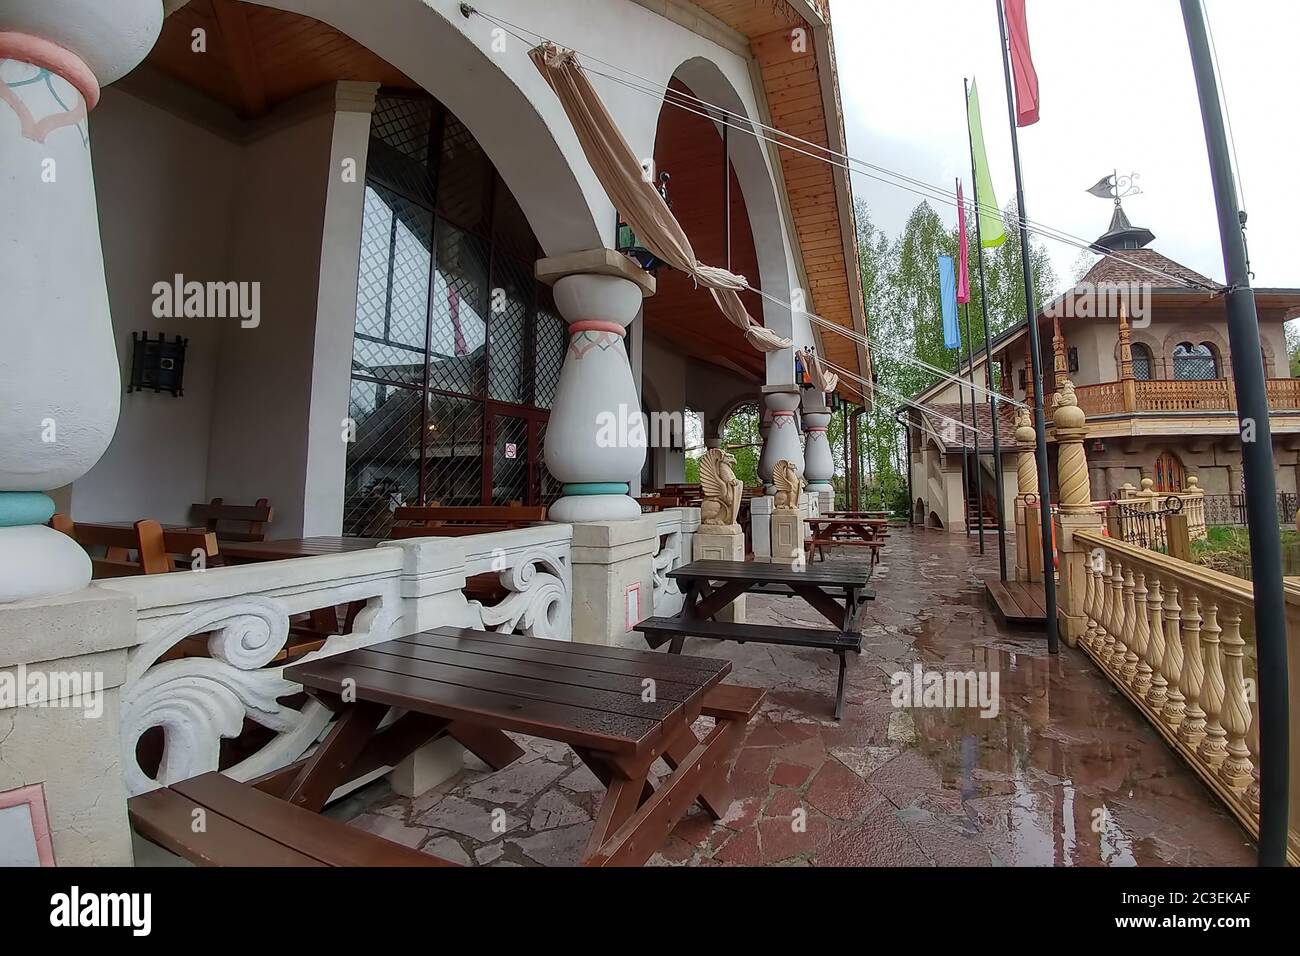 Ryazan, Russia - April 14, 2019: Restaurant of Ethnic hotel 'Как v staroy skazke' in Russian style. Hotel 'Like an old fairy tale.' Made in the ethnic Russian style and located in the forest. Stock Photo